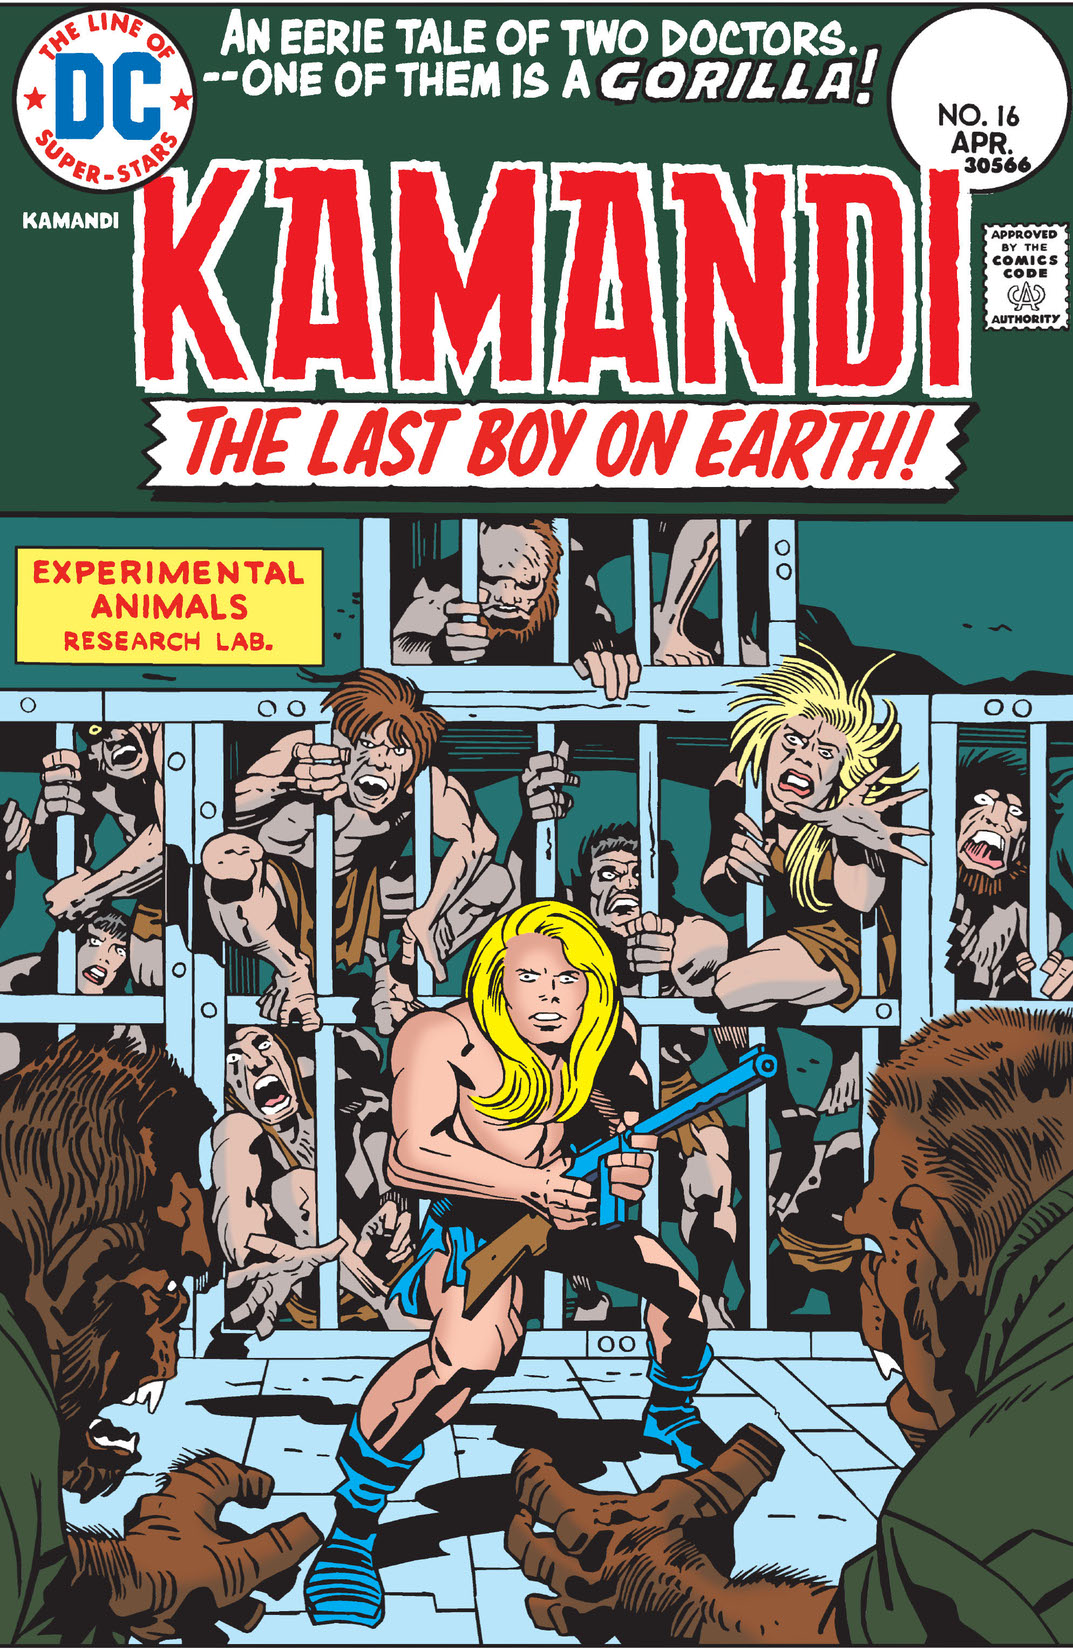 Kamandi: The Last Boy on Earth #16 preview images